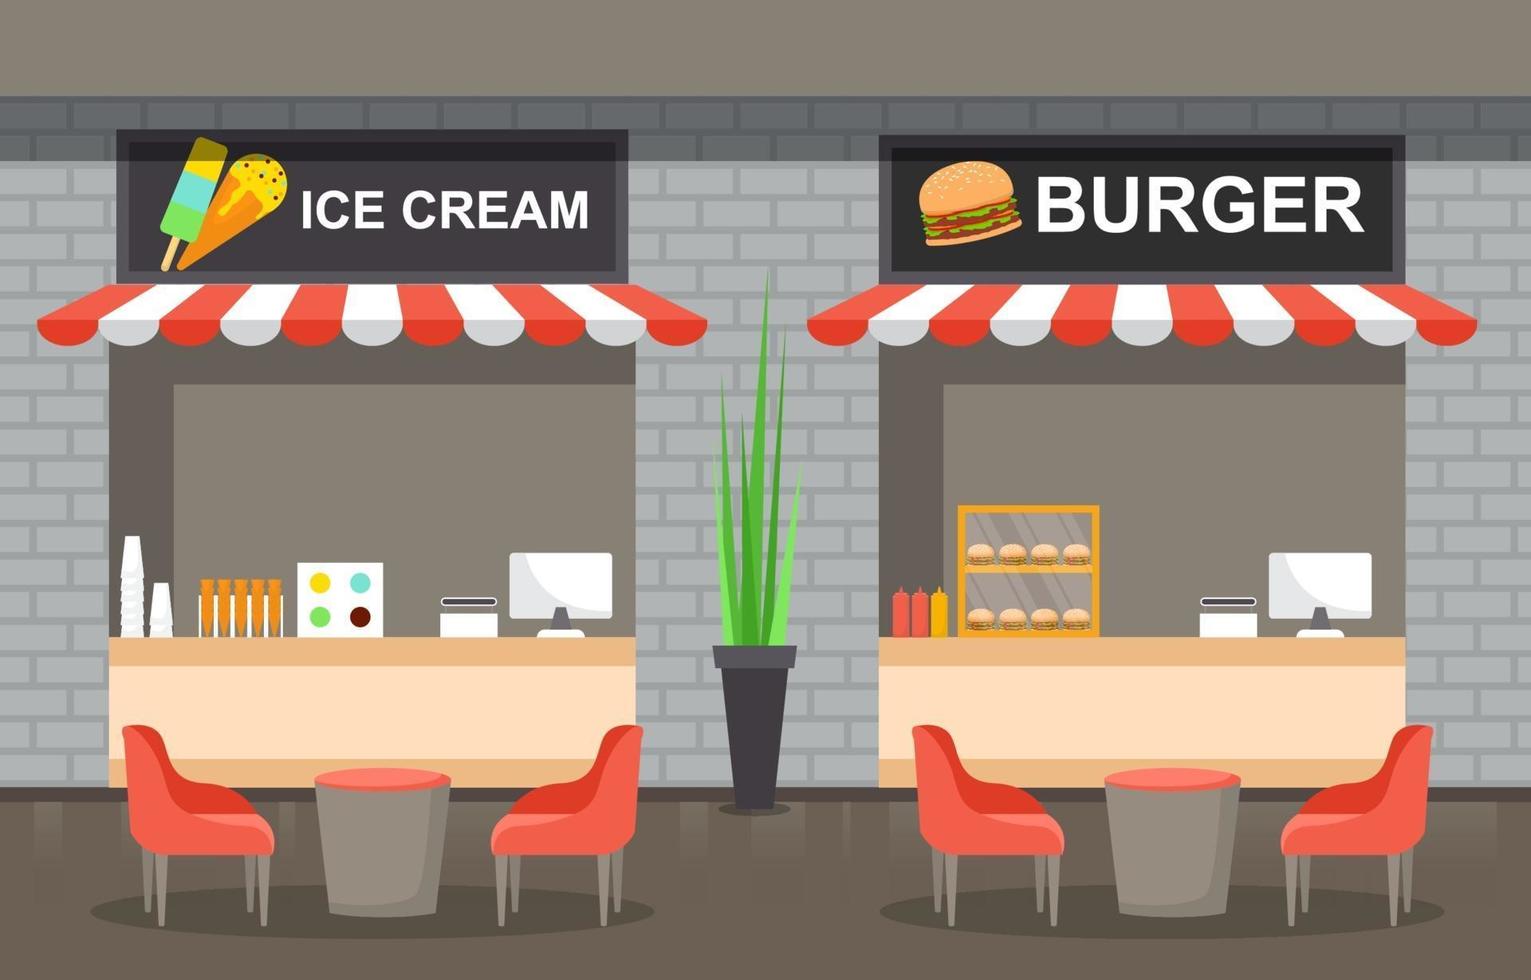 Food Court Interior with Ice Cream and Burger Restaurants with Empty Tables and Chairs vector